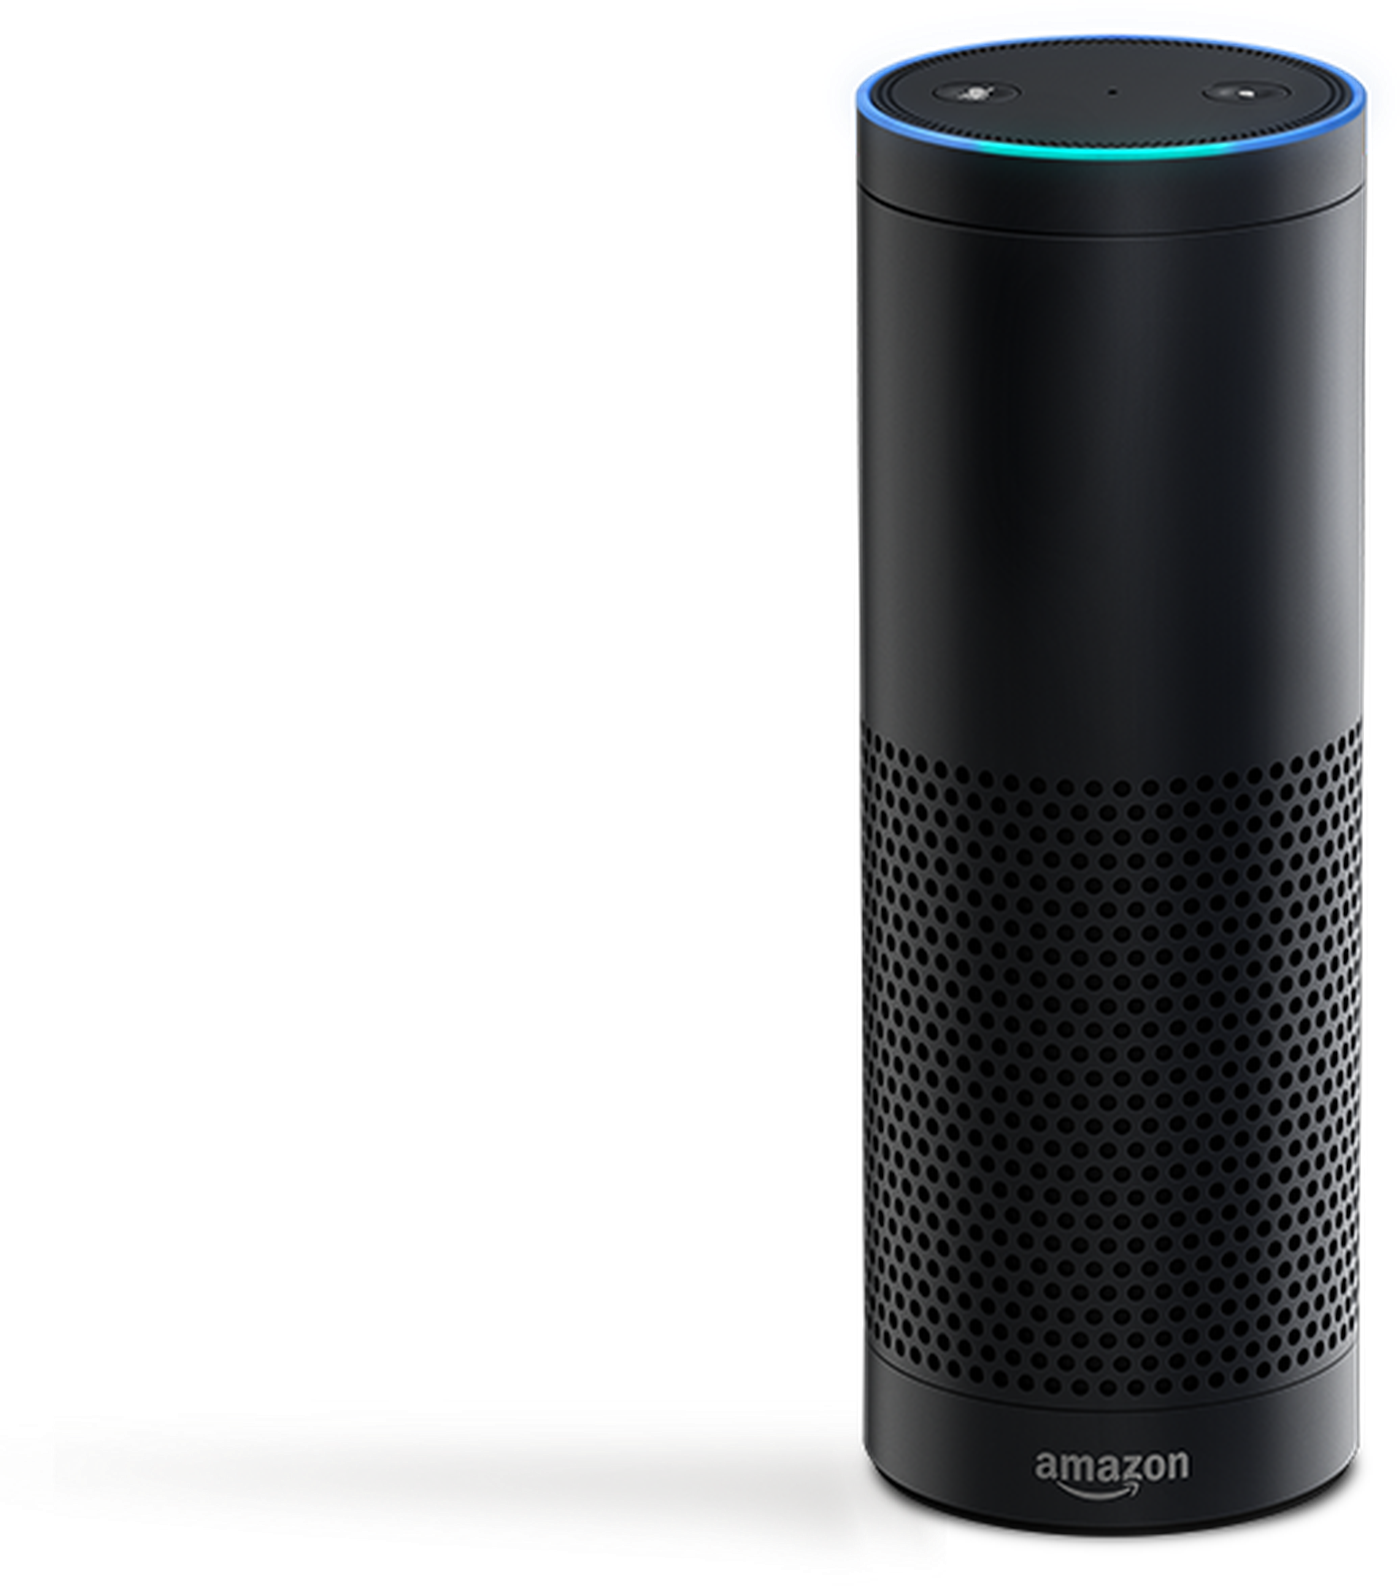 Amazon launches $199 voice-recognition device called Echo